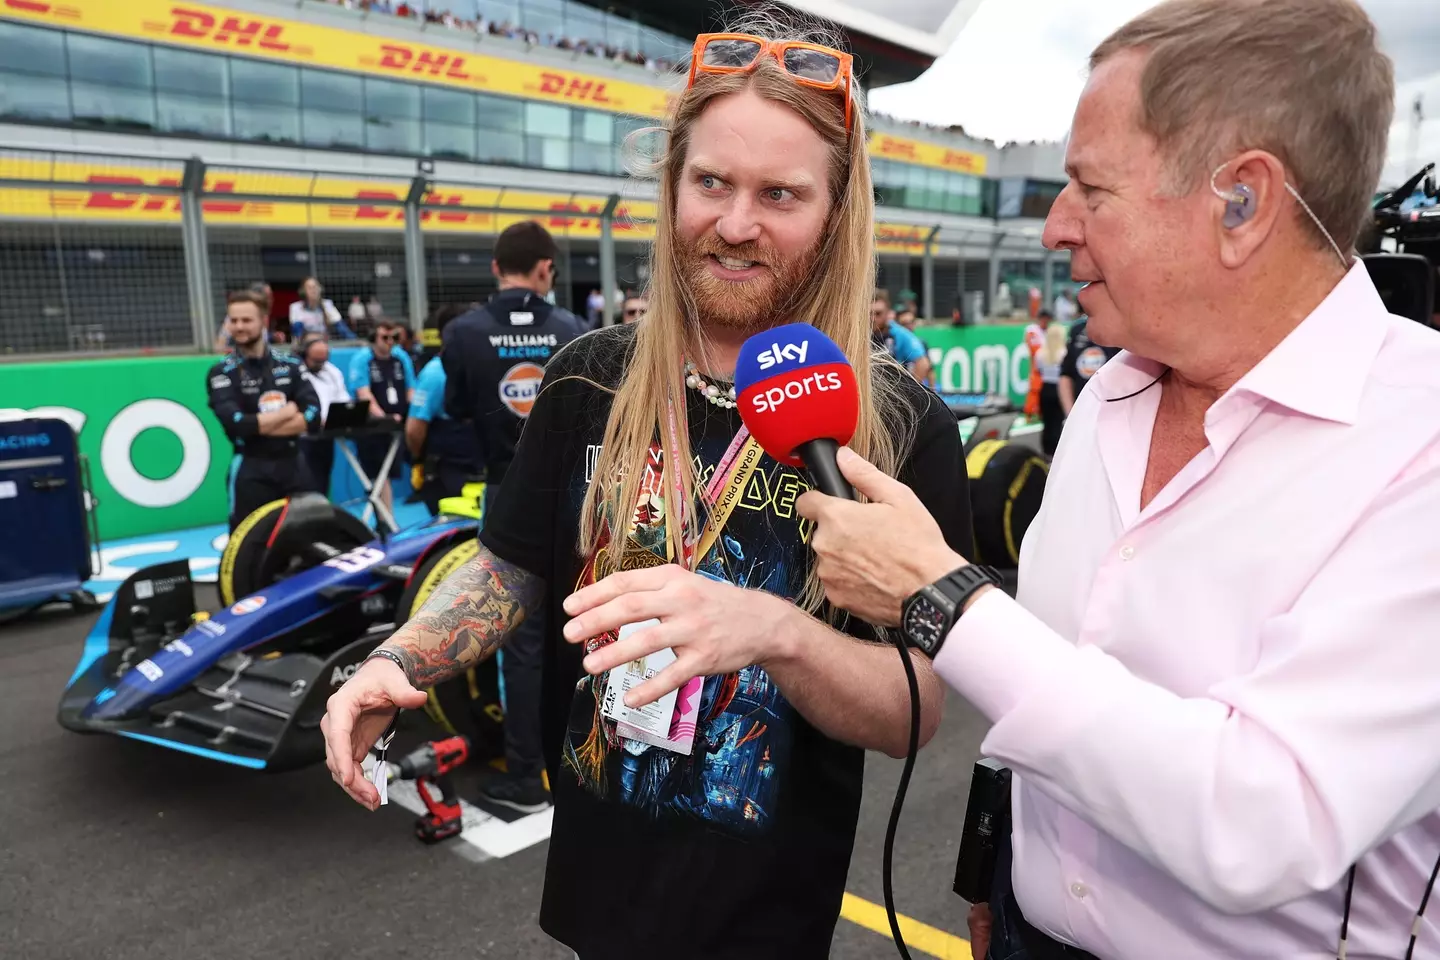 Martin Brundle said there's a clause that means celebs can't bring security onto the grid.